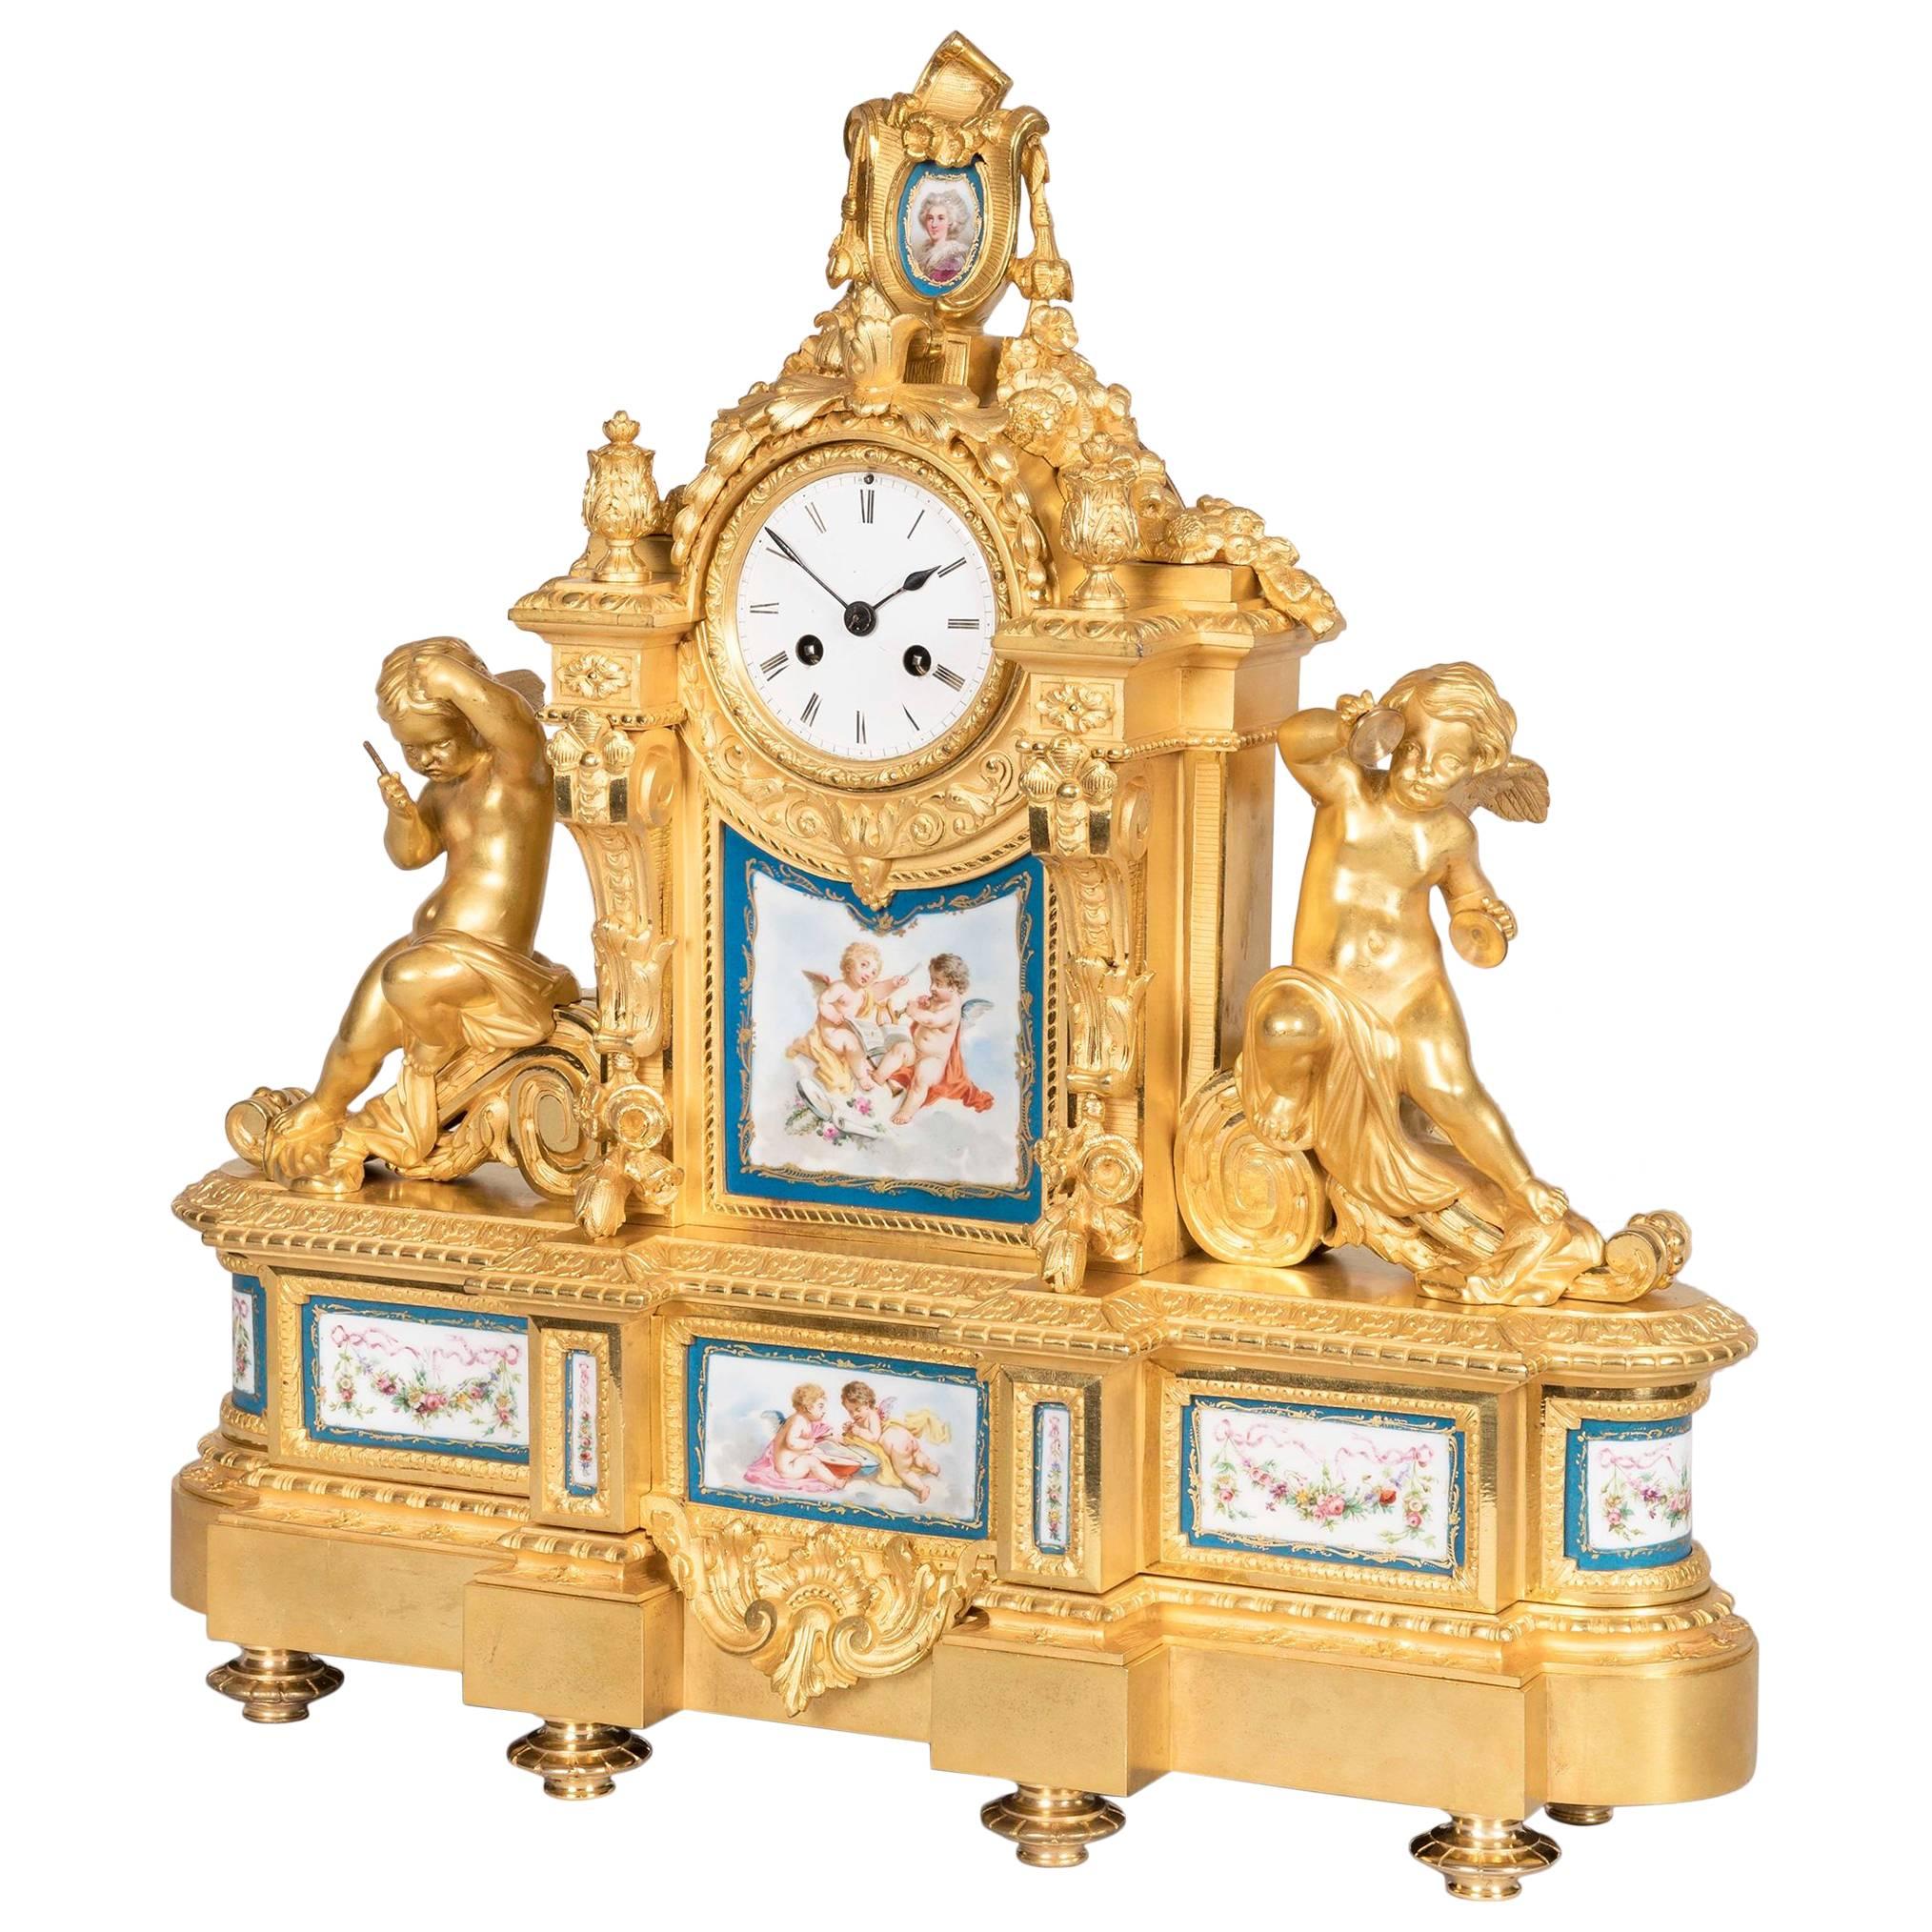 19th Century French Gilt Bronze and Porcelain Clock in the Louis XVI Taste